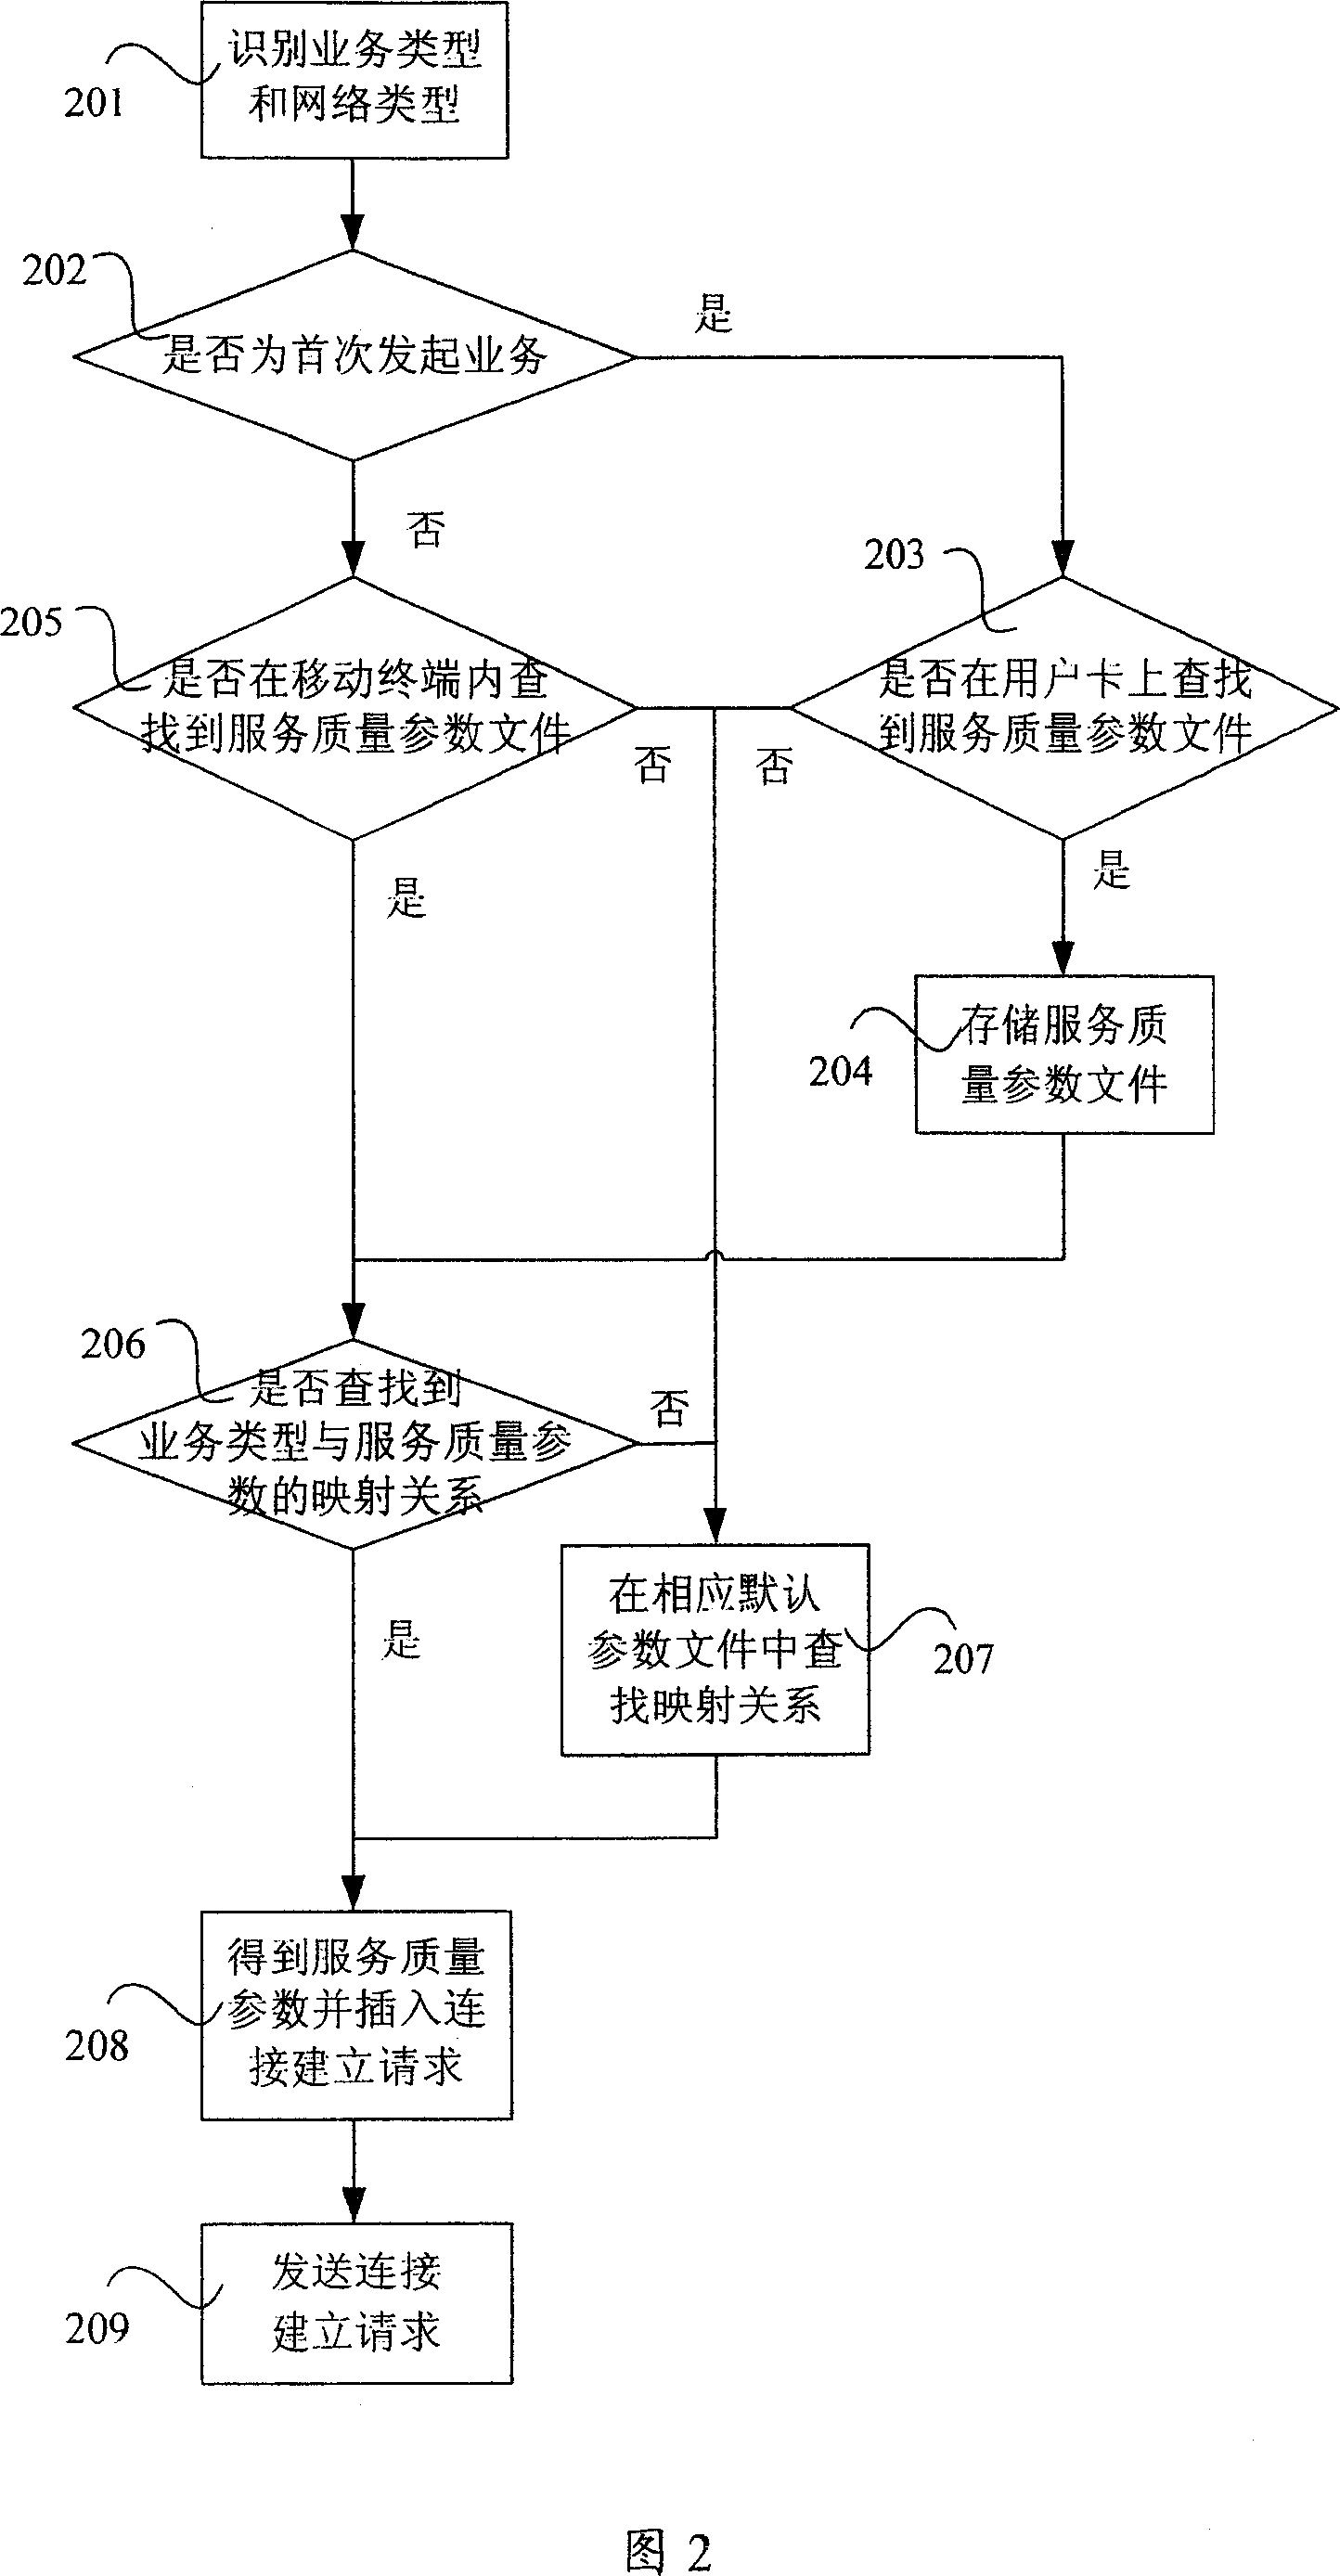 Mobile terminal service quality parameter mapping method